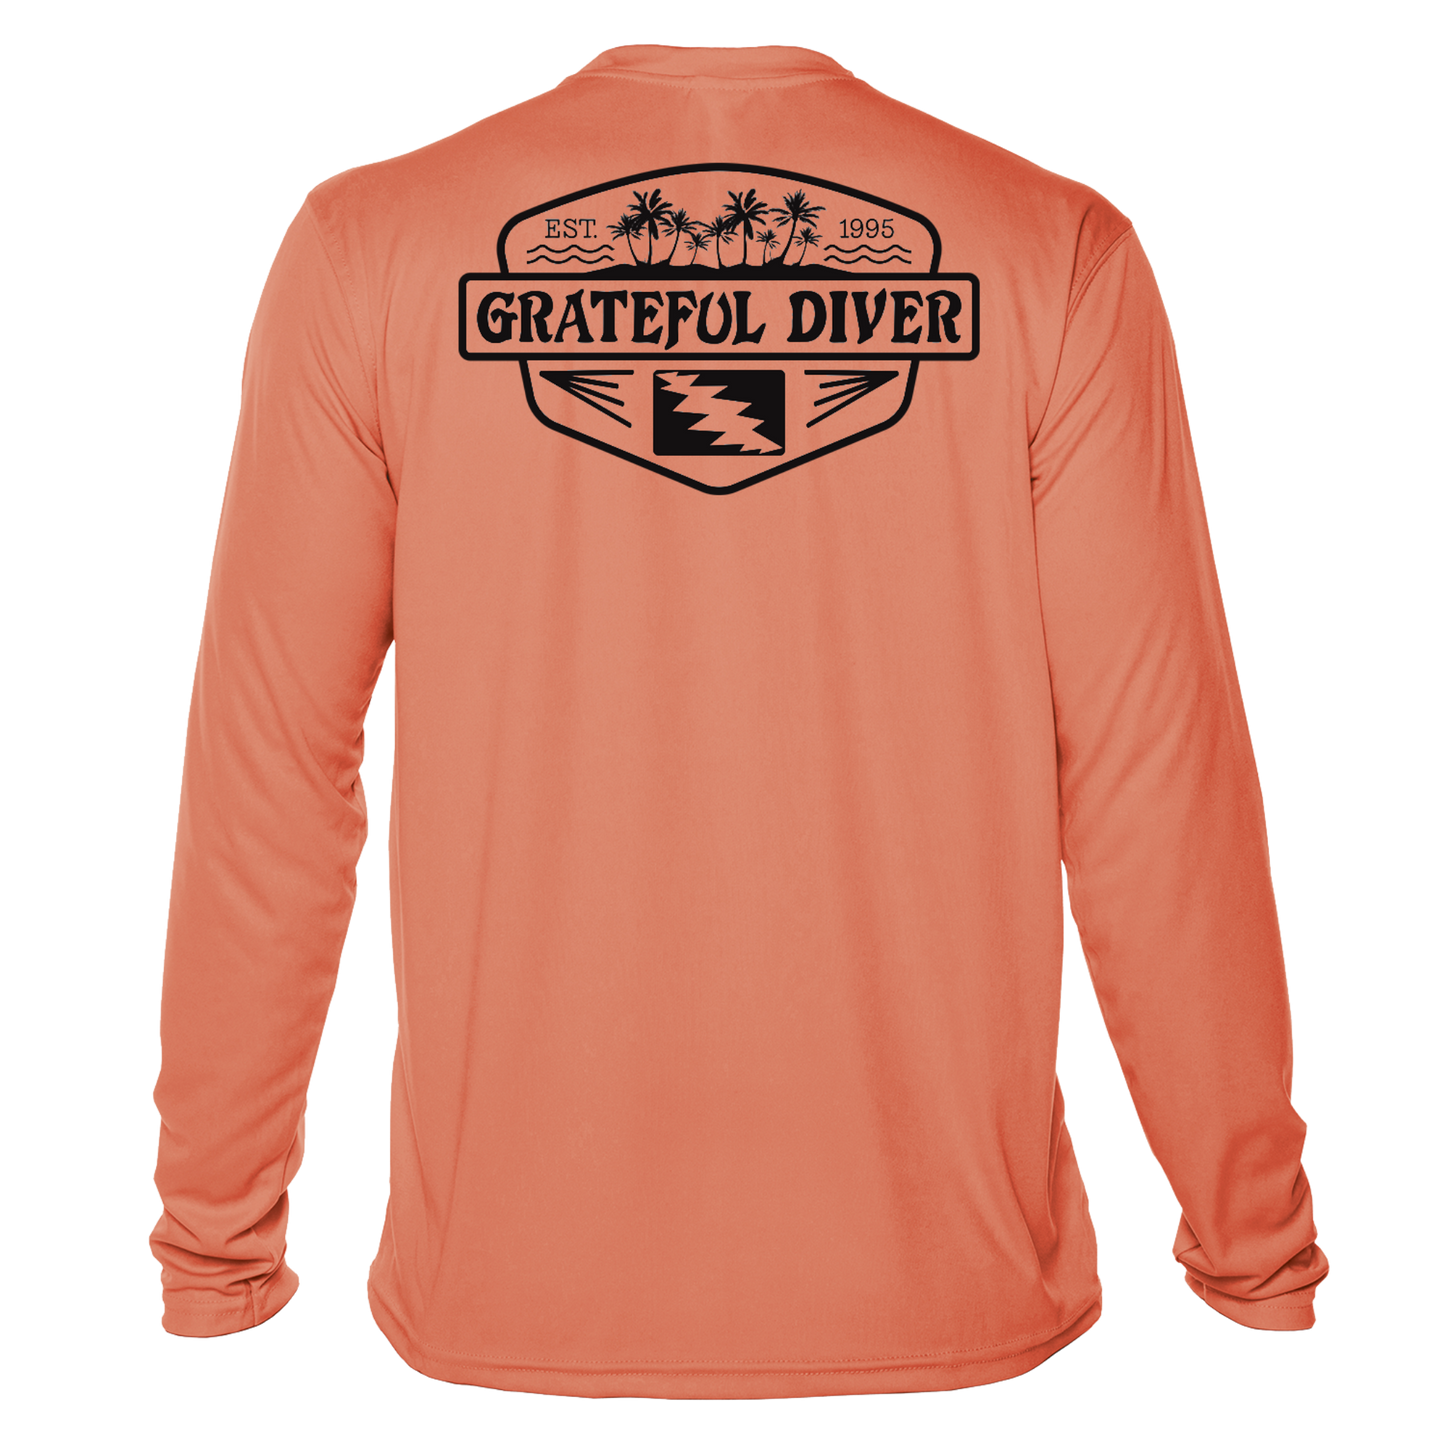 Grateful Diver Palm Tree UV Shirt in salmon showing the back off figure